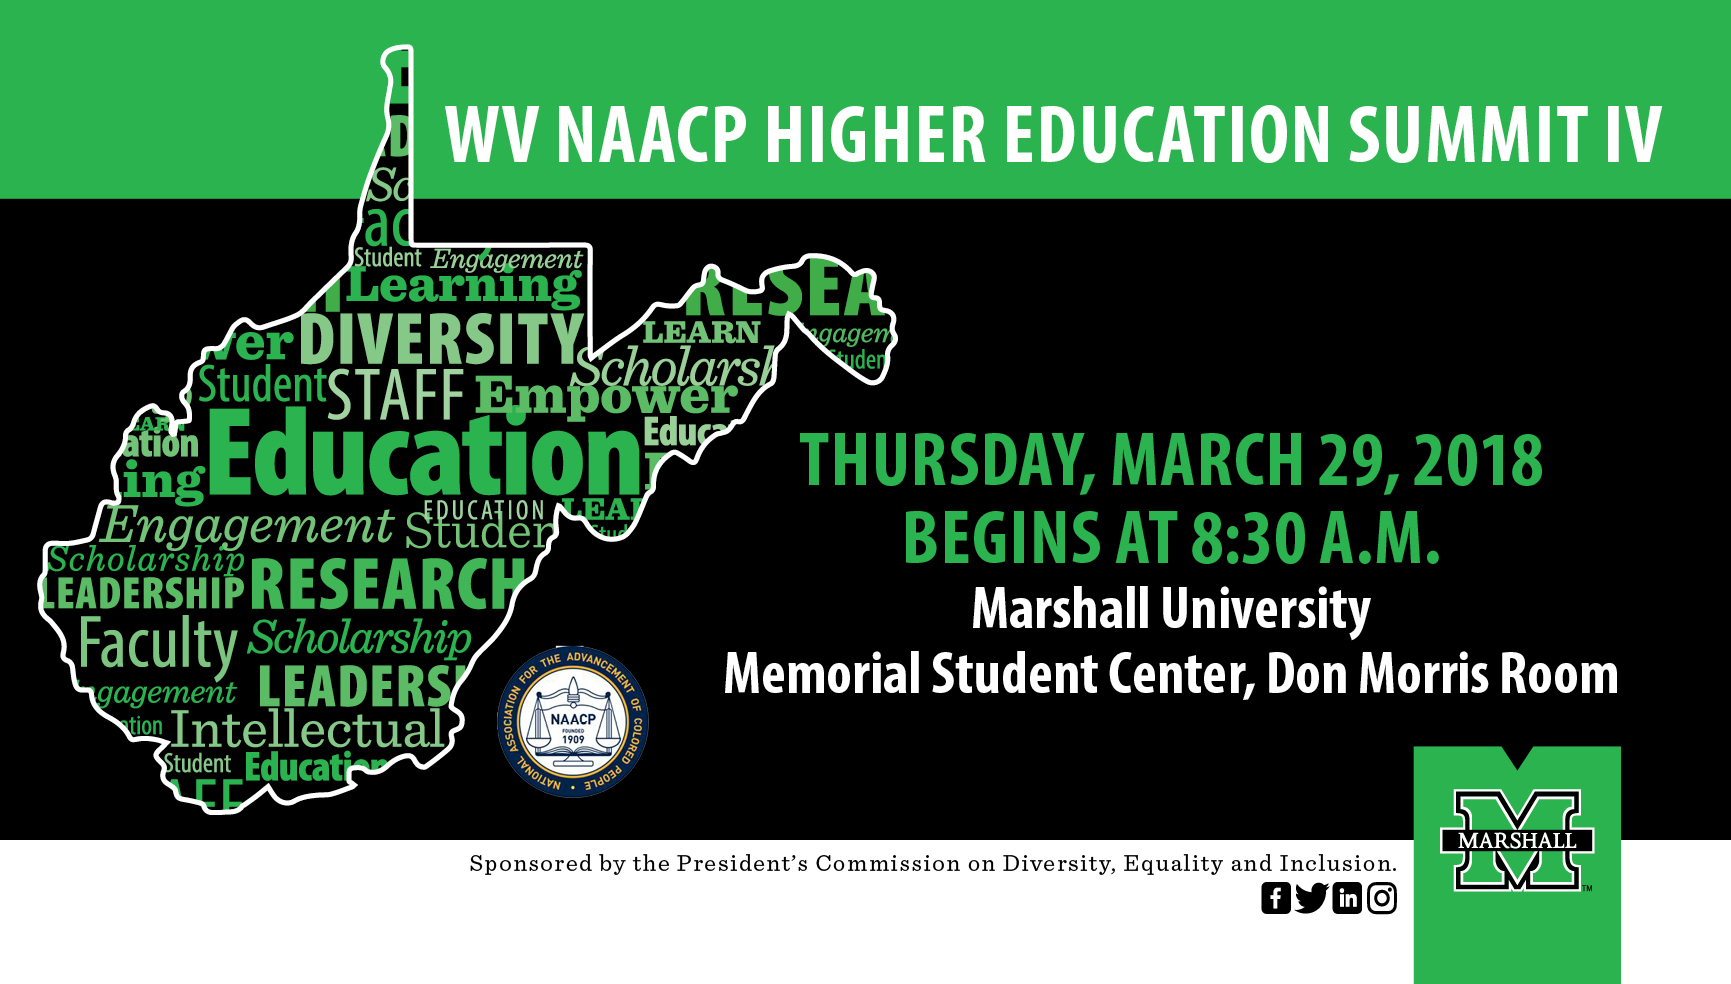 WV NAACP Higher Education Summit IV